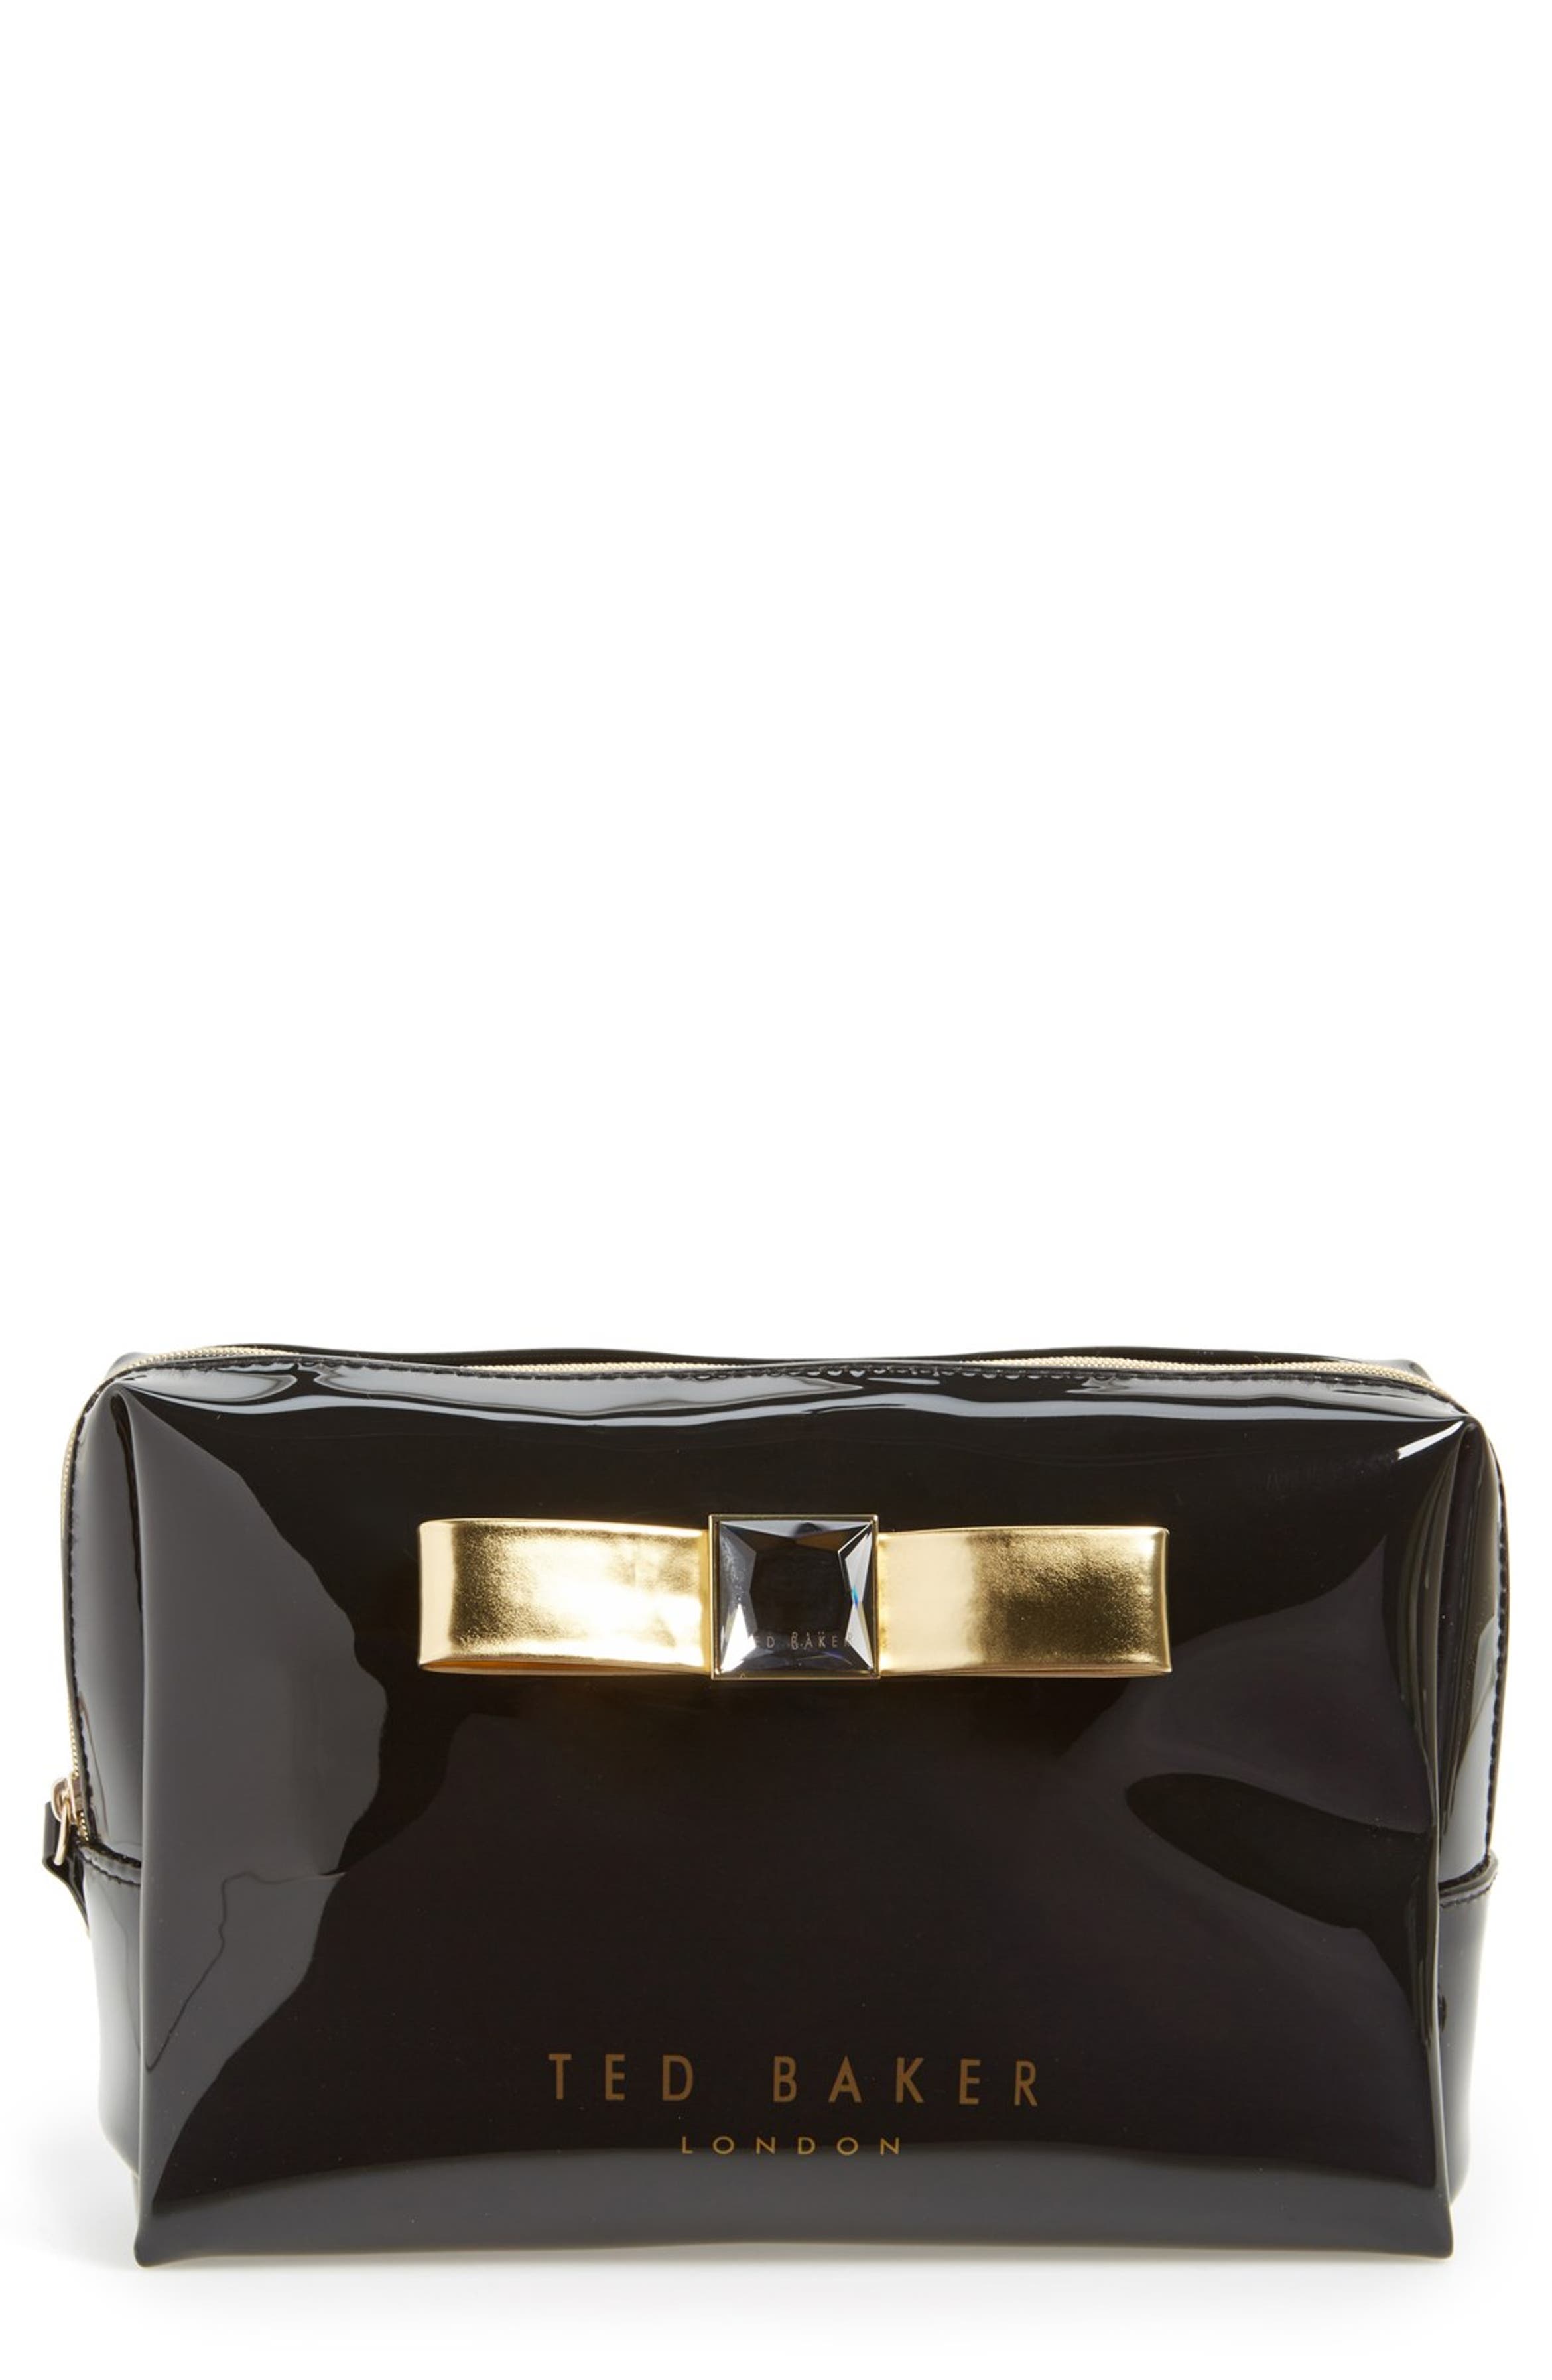 Ted Baker London 'Metallic Bow' Cosmetics Case | Nordstrom